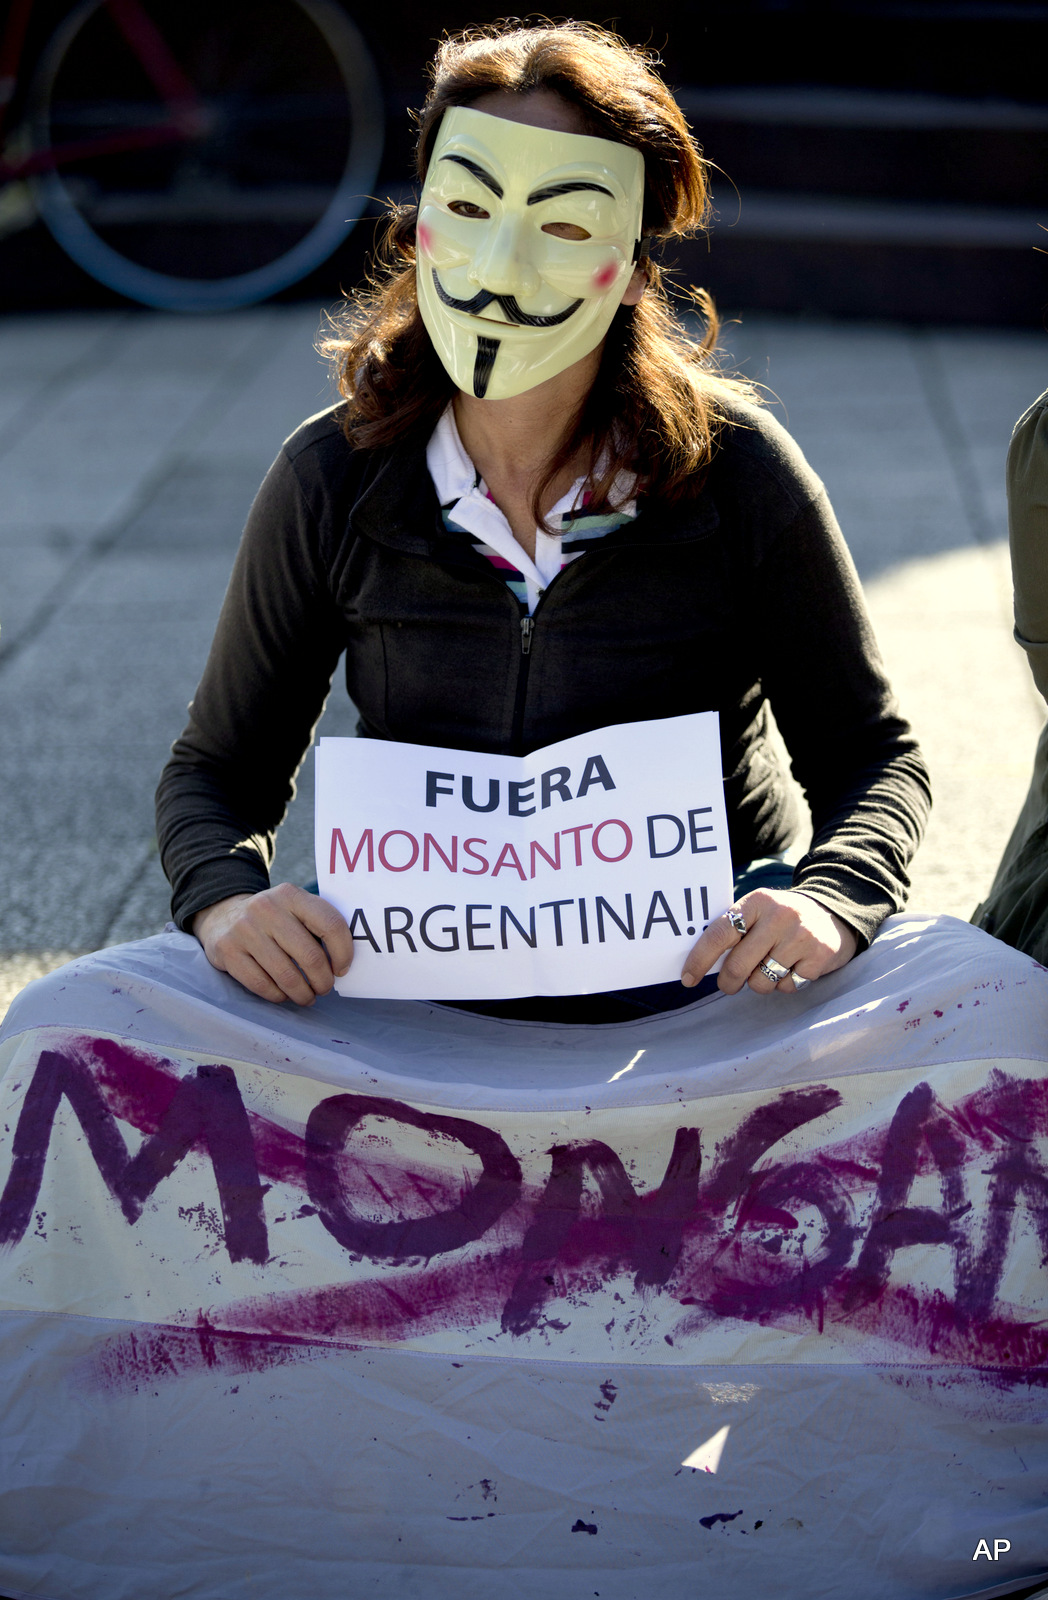 A demonstrator wearing as Guy Fawkes mask holds a sign that reads in Spanish "Get out Monsanto from Argentina" near the offices of the U.S.-based company Monsanto in Buenos Aires, Argentina, Saturday, May 25, 2013. 